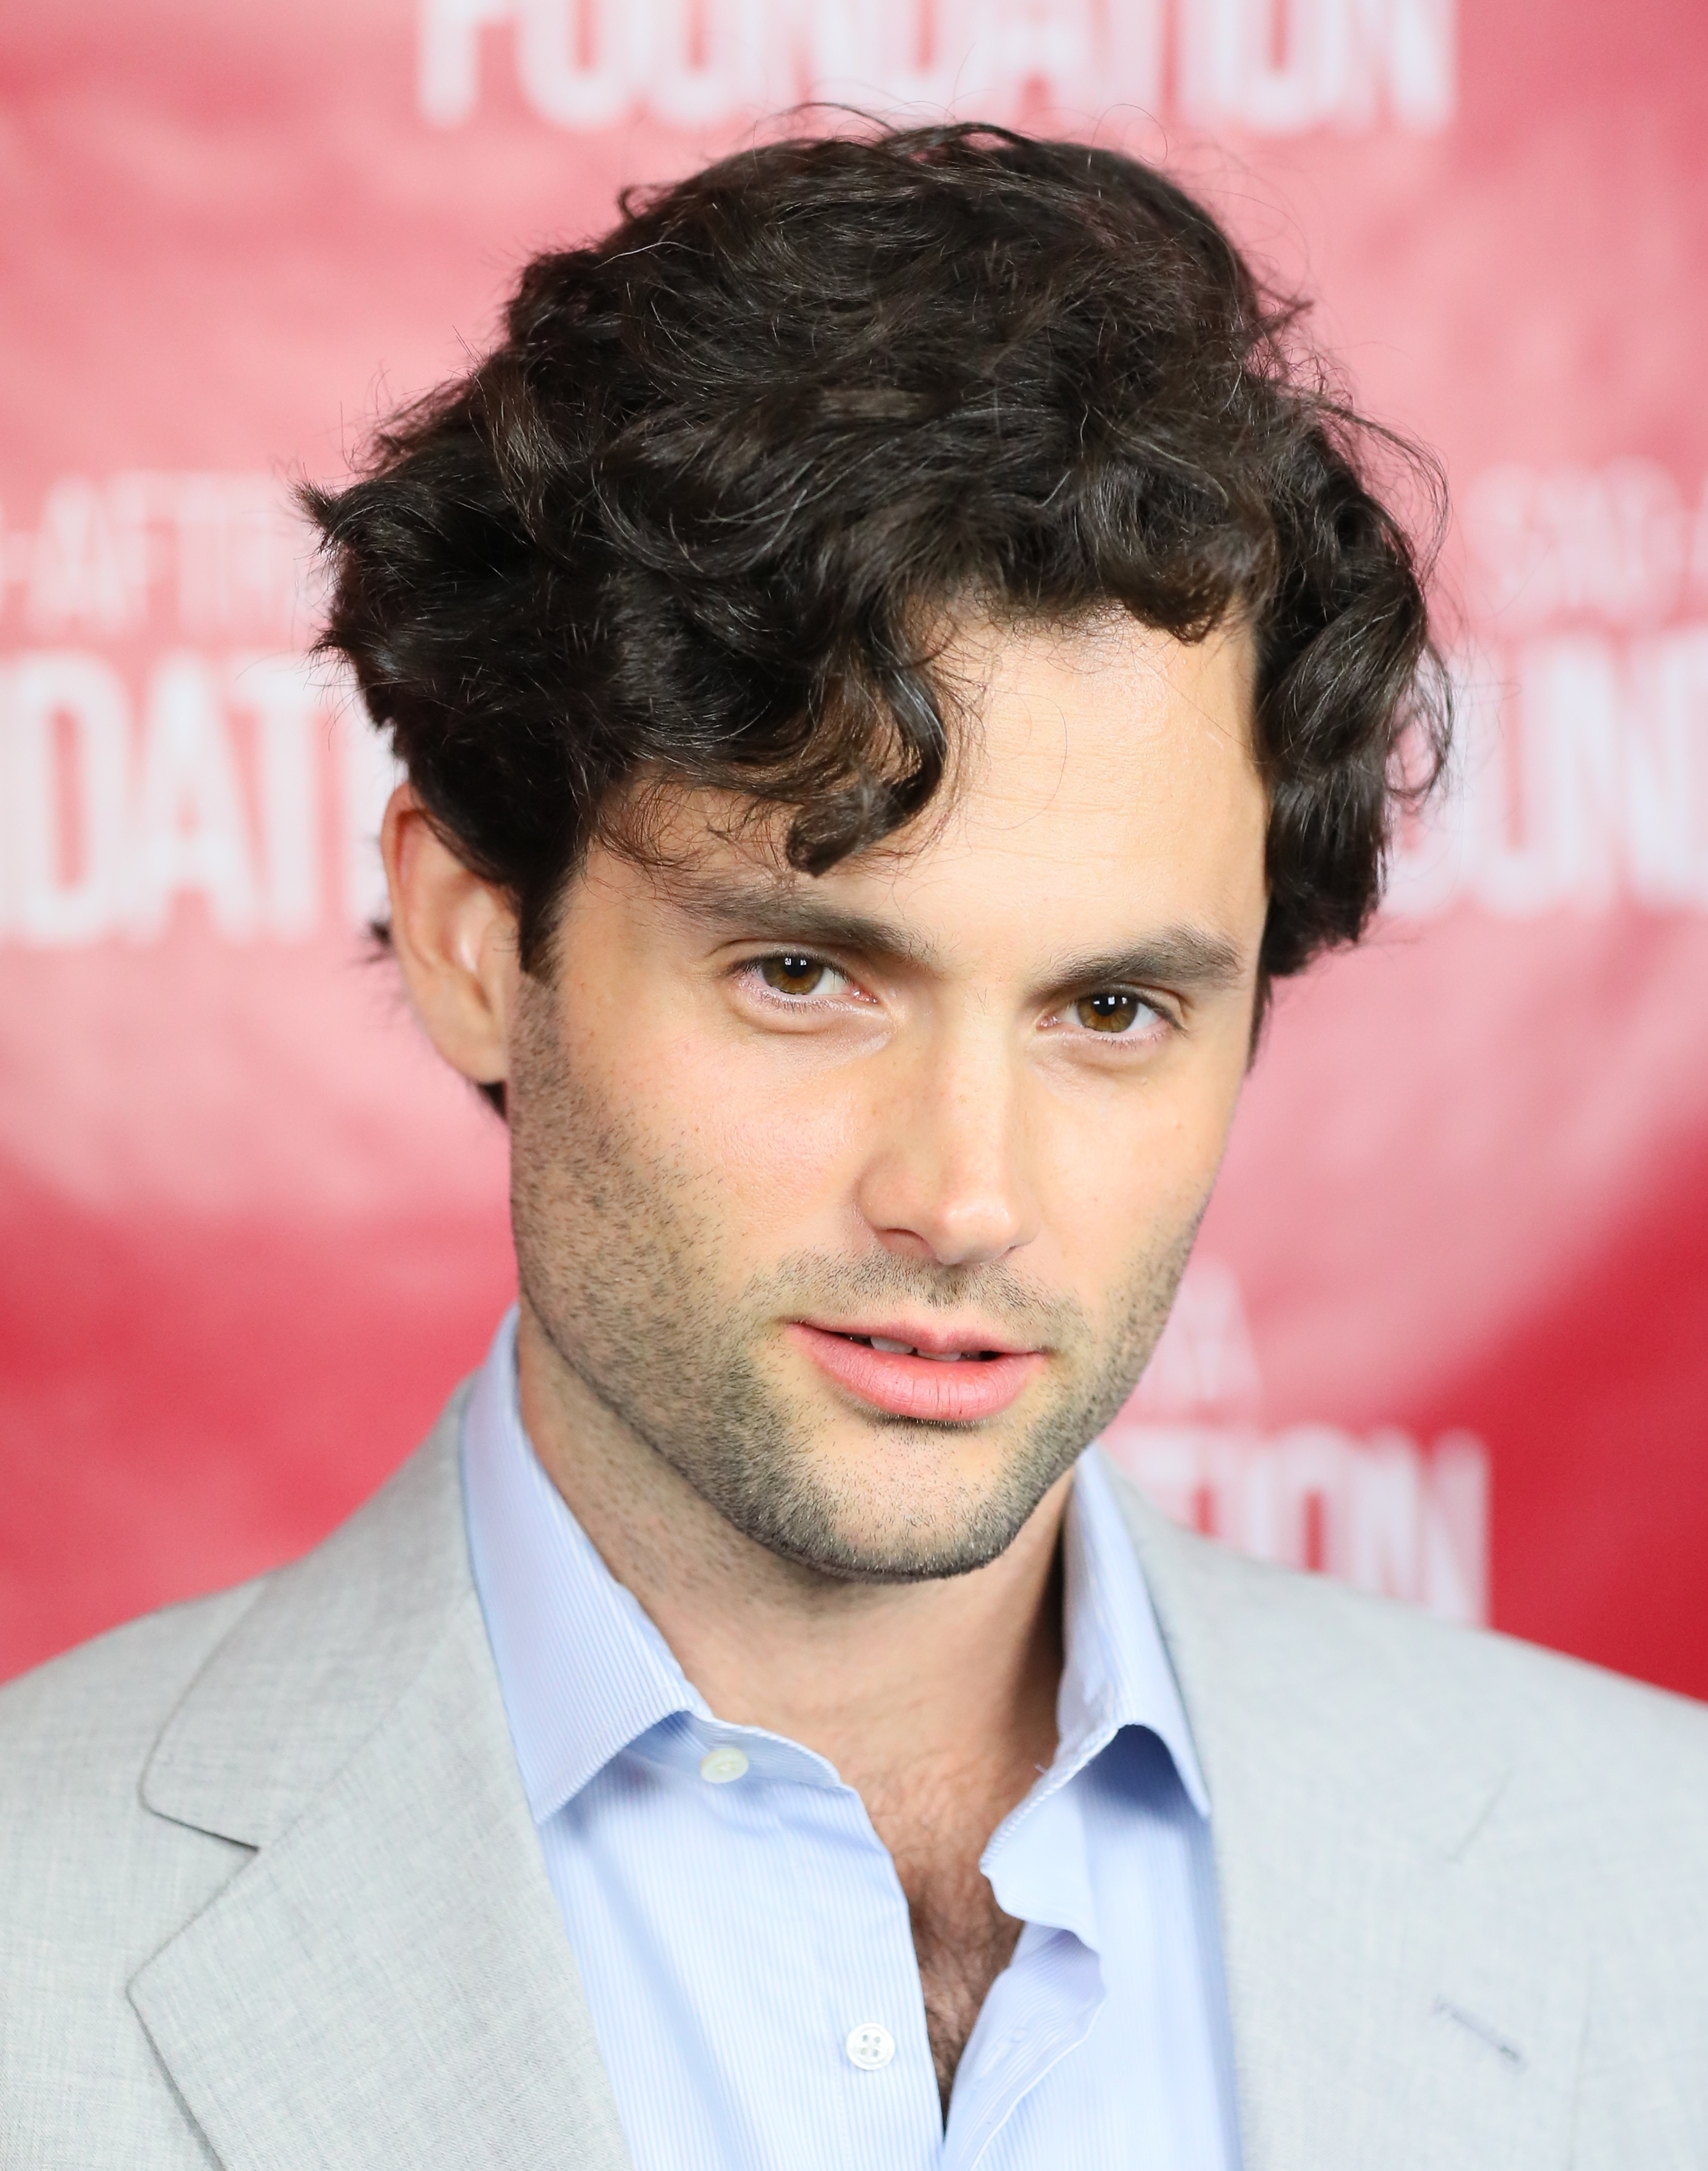 Penn Badgley in a blue shirt at an event, looking to the side